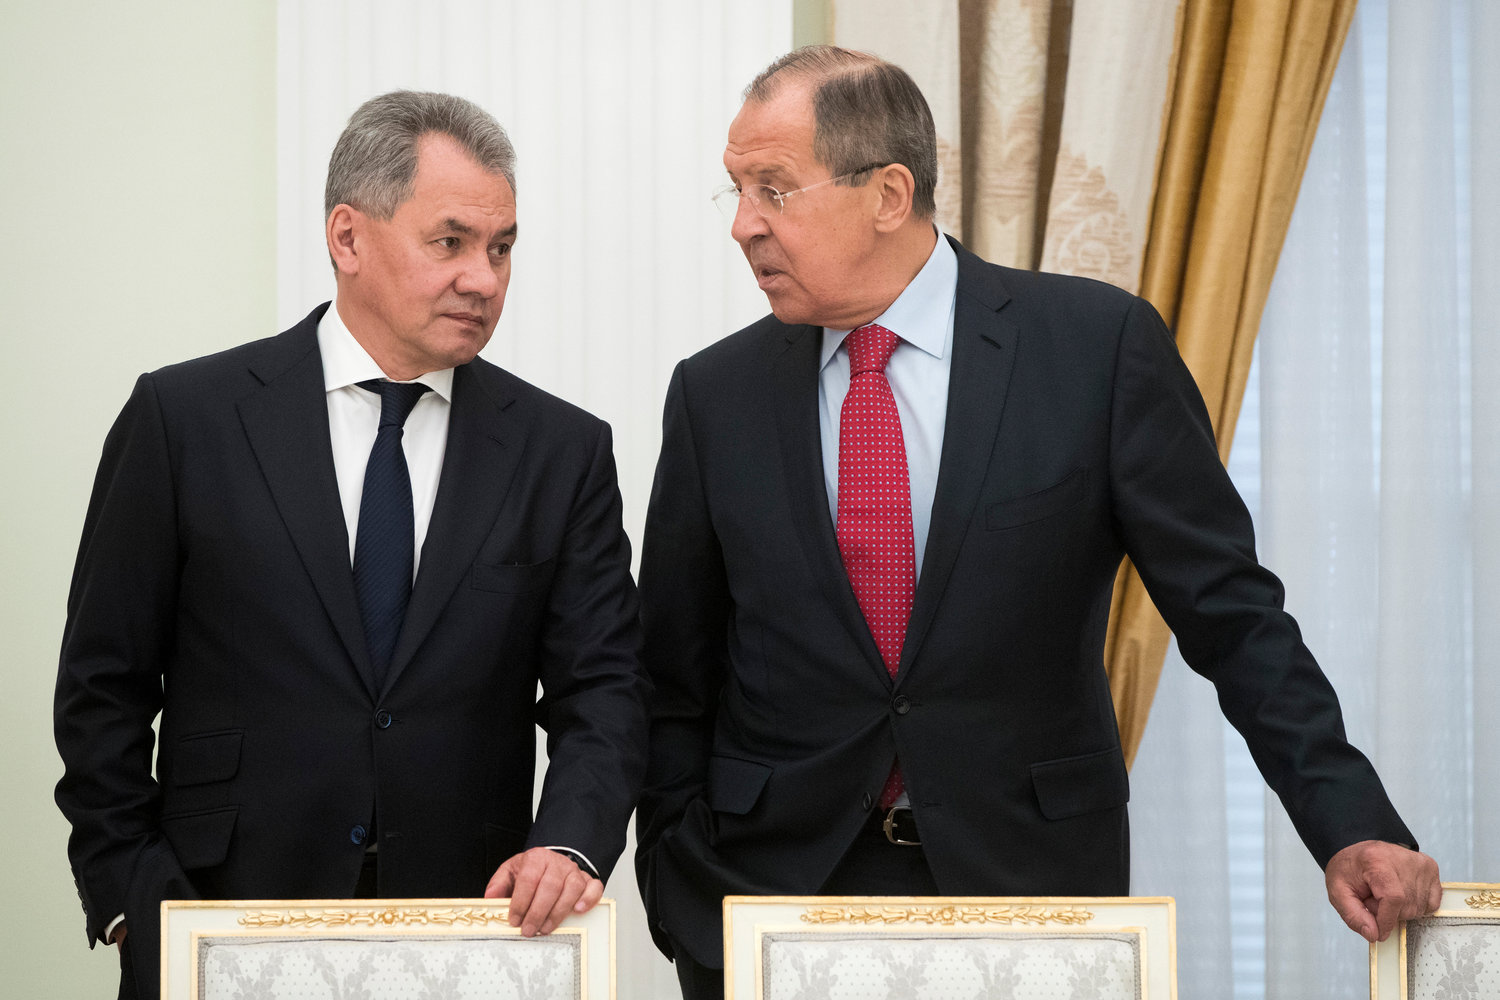 Russian Defense Minister Sergei Shoigu, left, and Foreign Minister Sergey Lavrov talk at the Kremlin, in Moscow on May 30, 2017. (AP Photo/Pavel Golovkin, Pool, File)